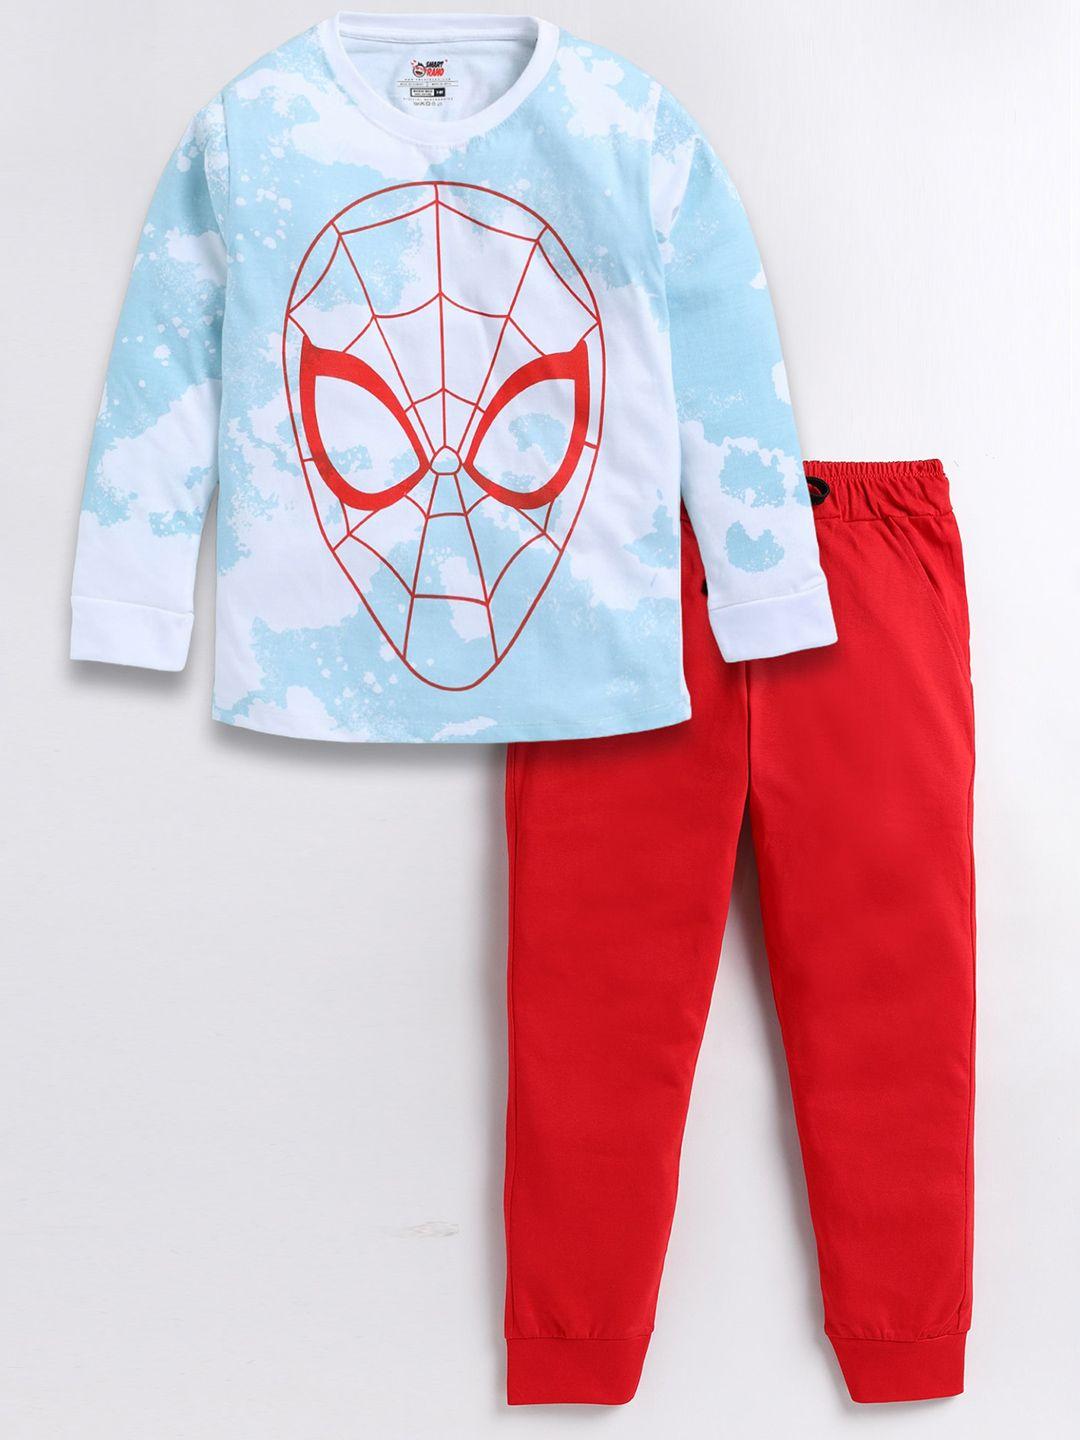 SmartRAHO Boys Red & Blue Printed T-shirt with Trousers